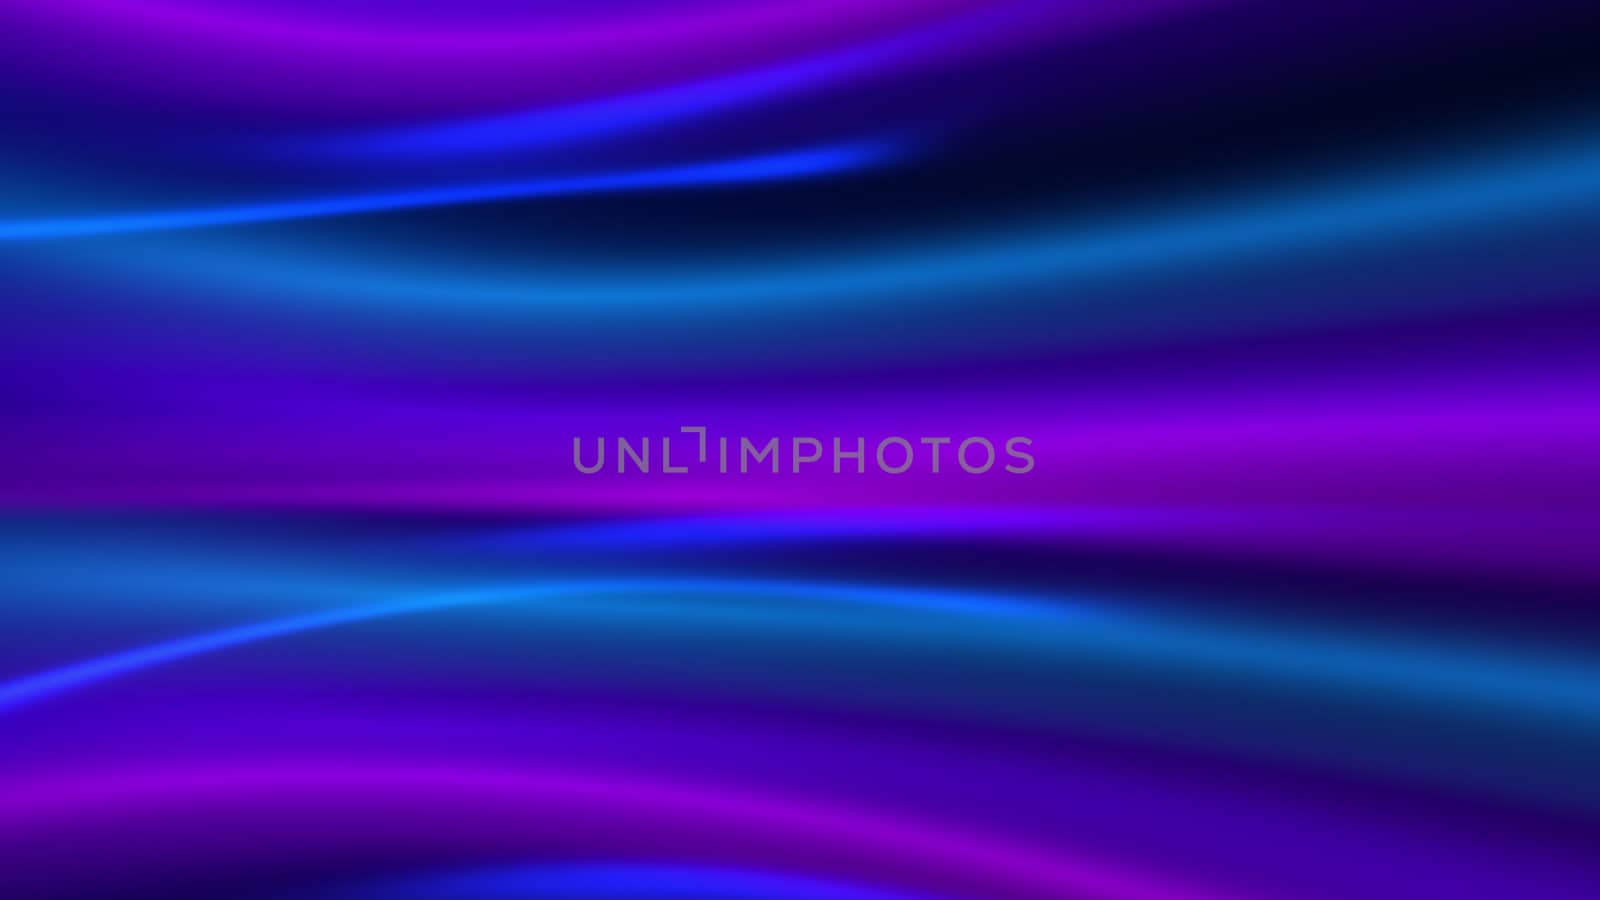 Shine wave background with lines, modern abstract 3d rendering, computer generated backdrop